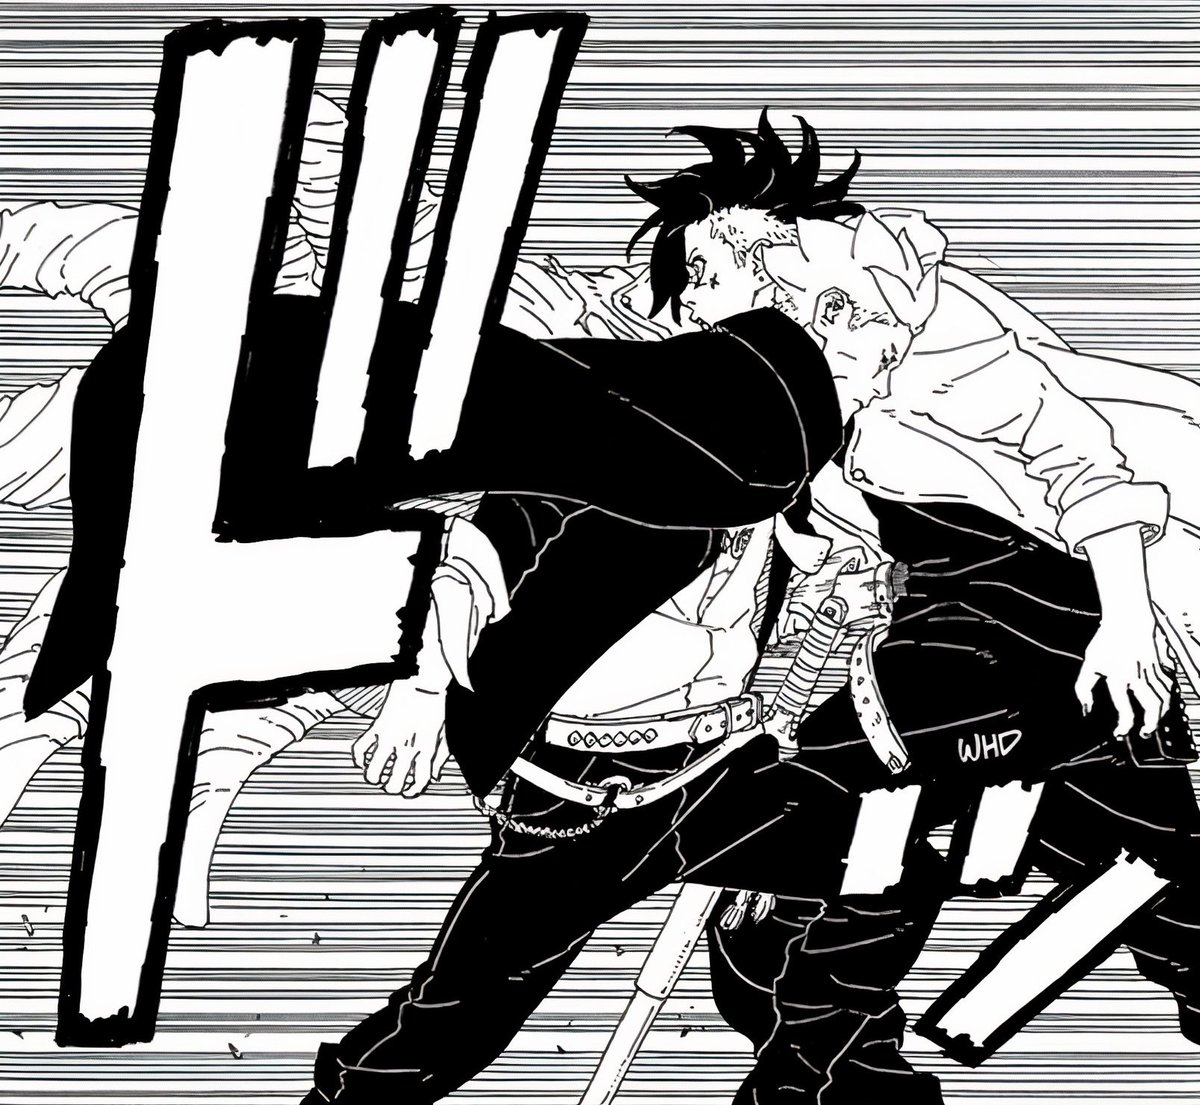 I’m sorry but Kawaki’s been turned into a punching bag lately. Bro can’t win one fight🤣😂!